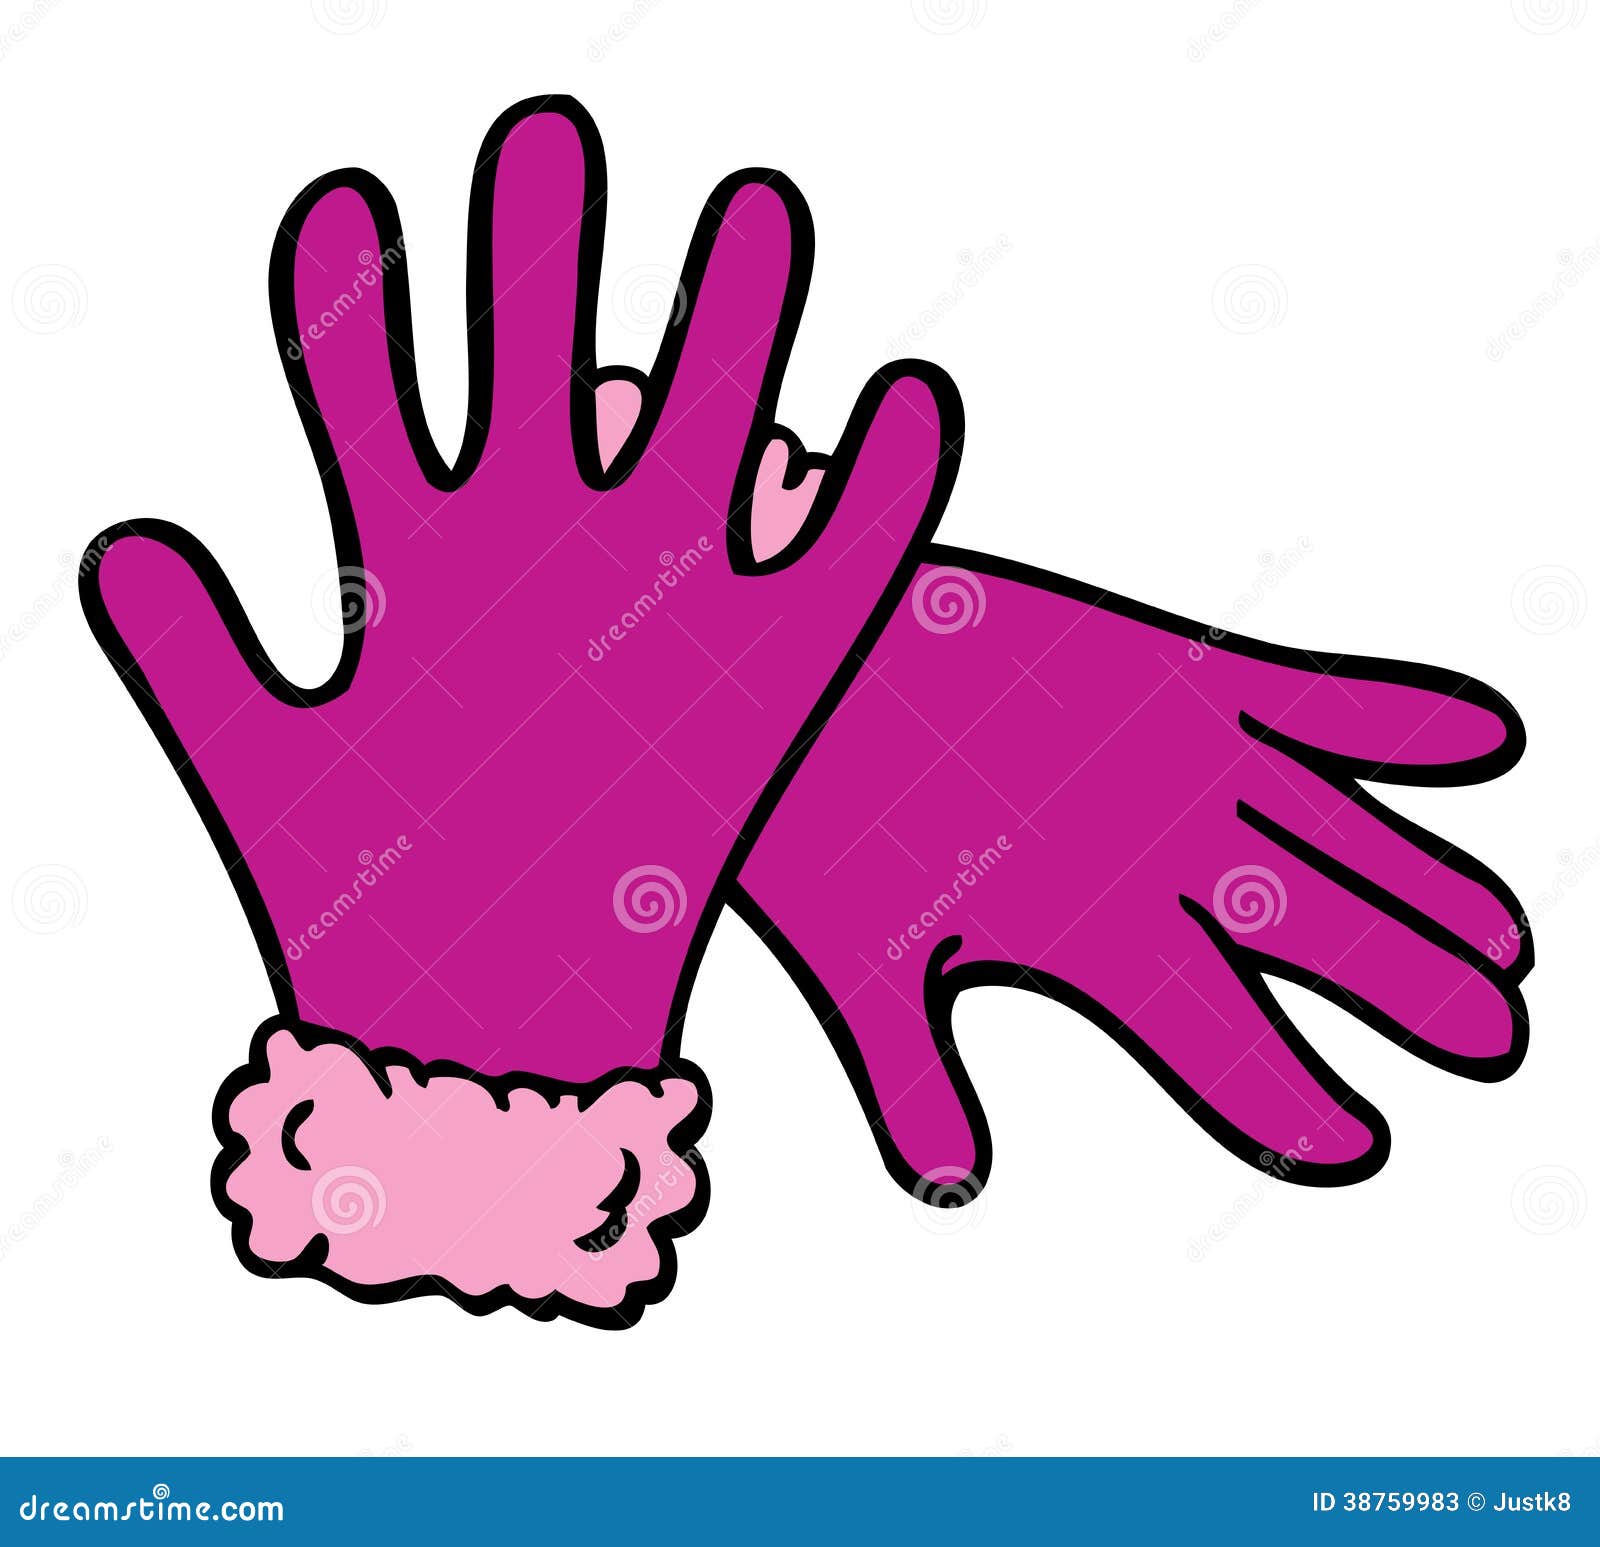 clipart of gloves - photo #15